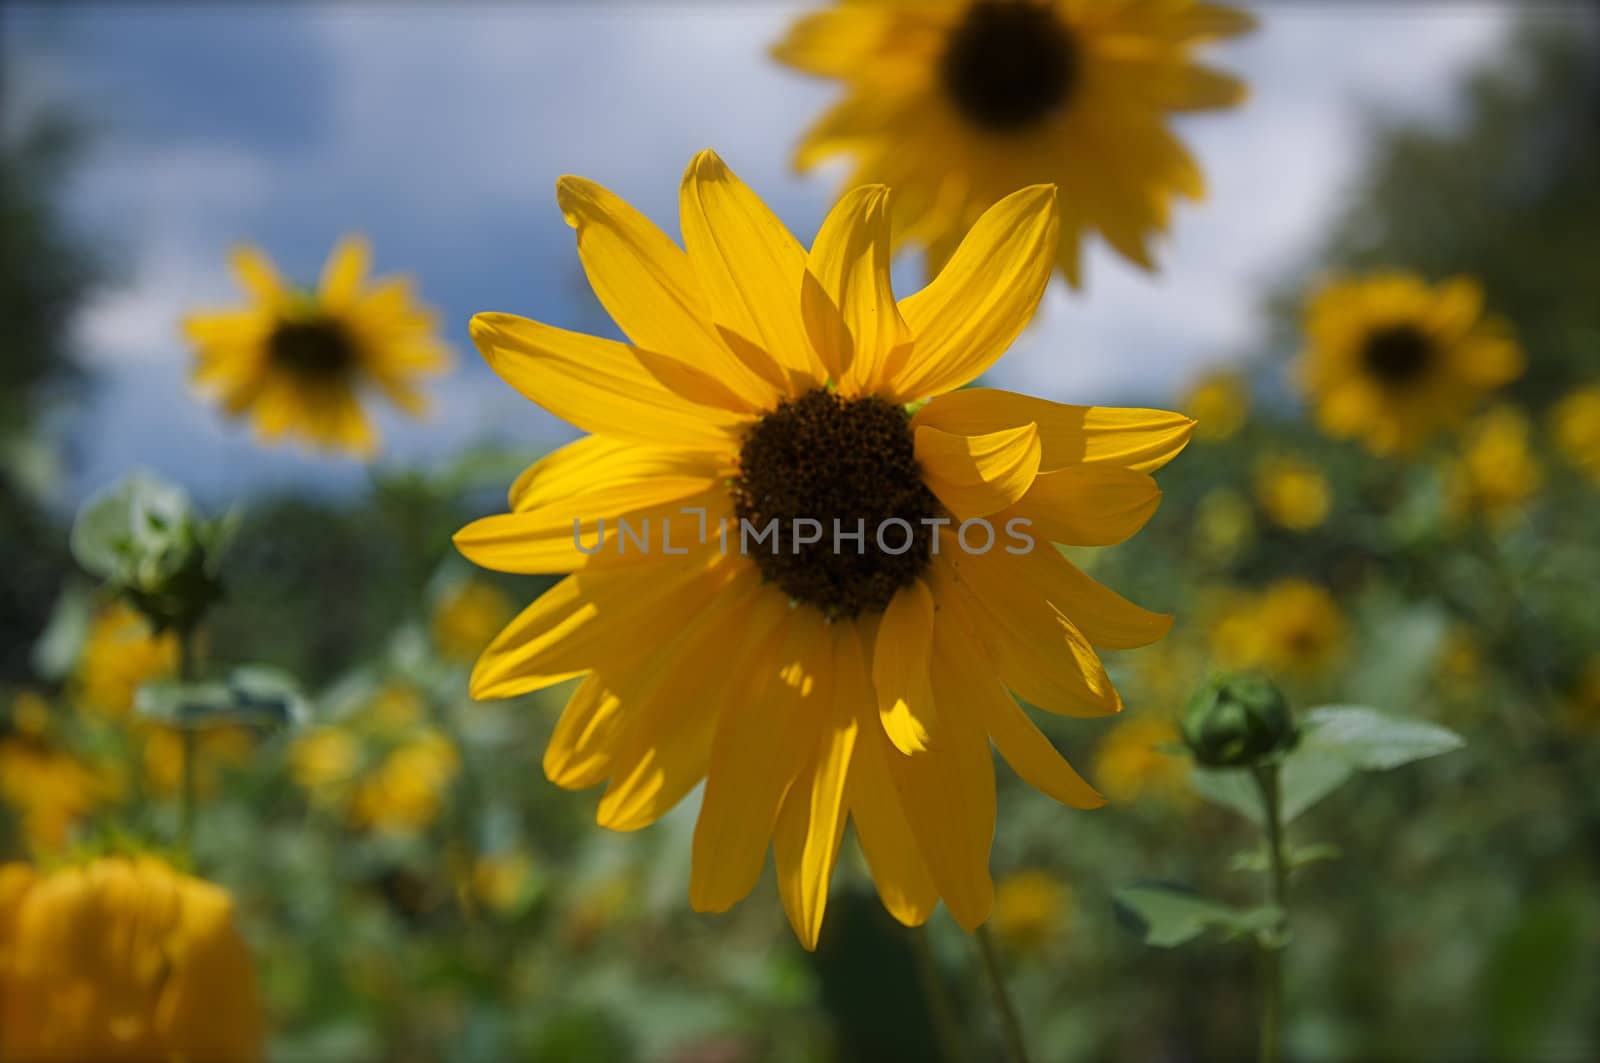 Field full of Sunflowers by gilmourbto2001